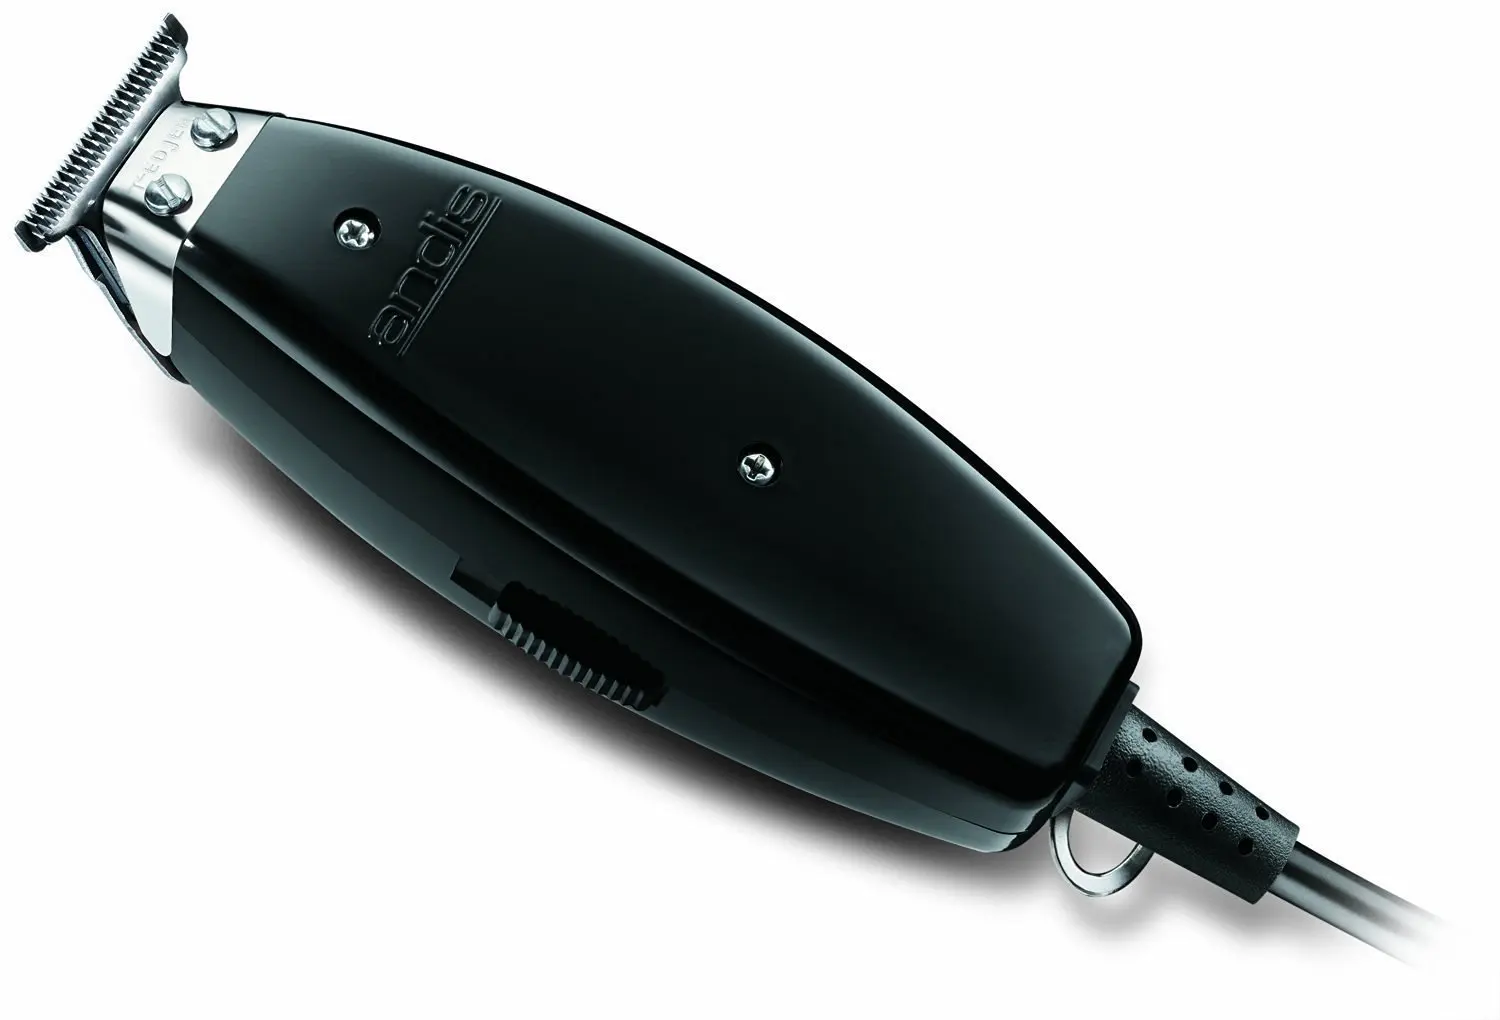 andis clipper blades swappable with oter clipper blades